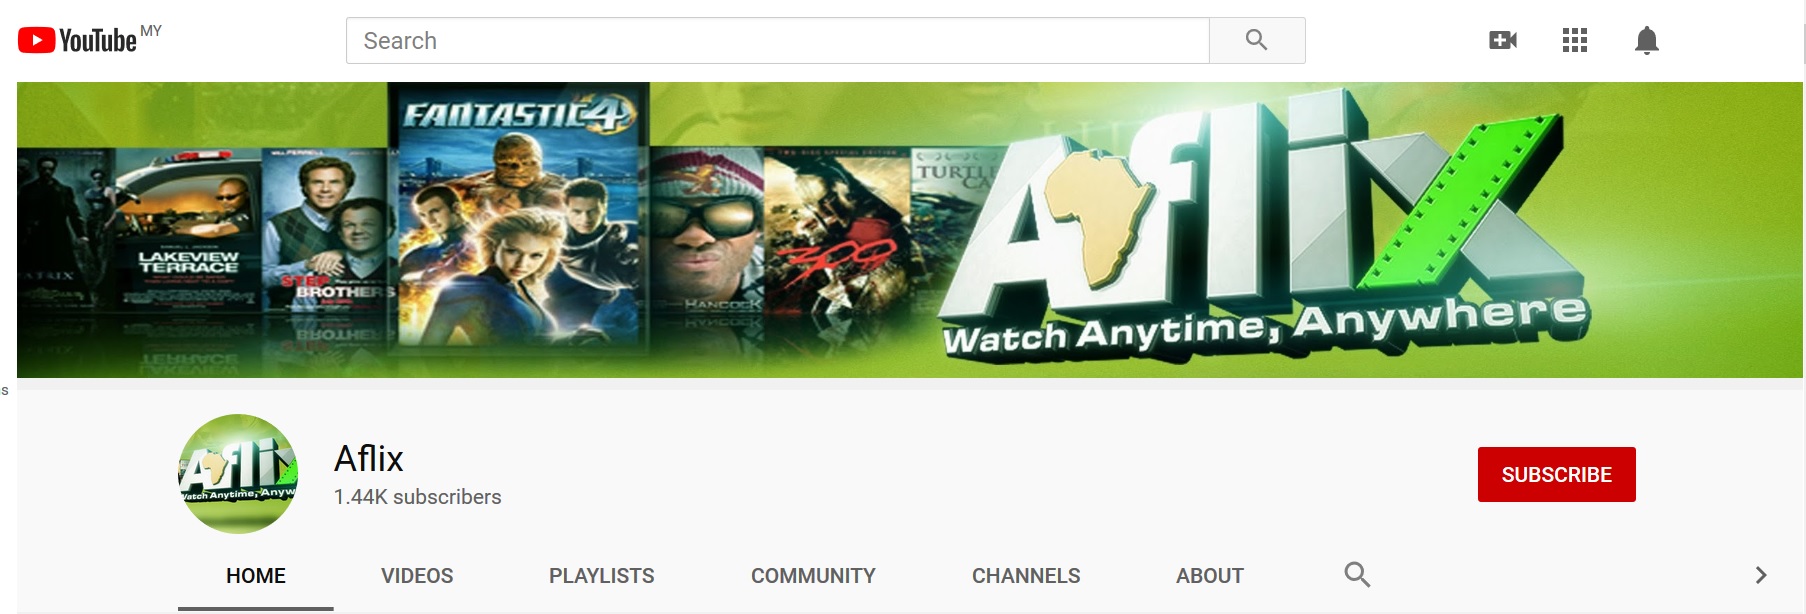 What you get when you click on the YouTube link. Note the African continent in the logo. Screengrabbed from AflixTV.